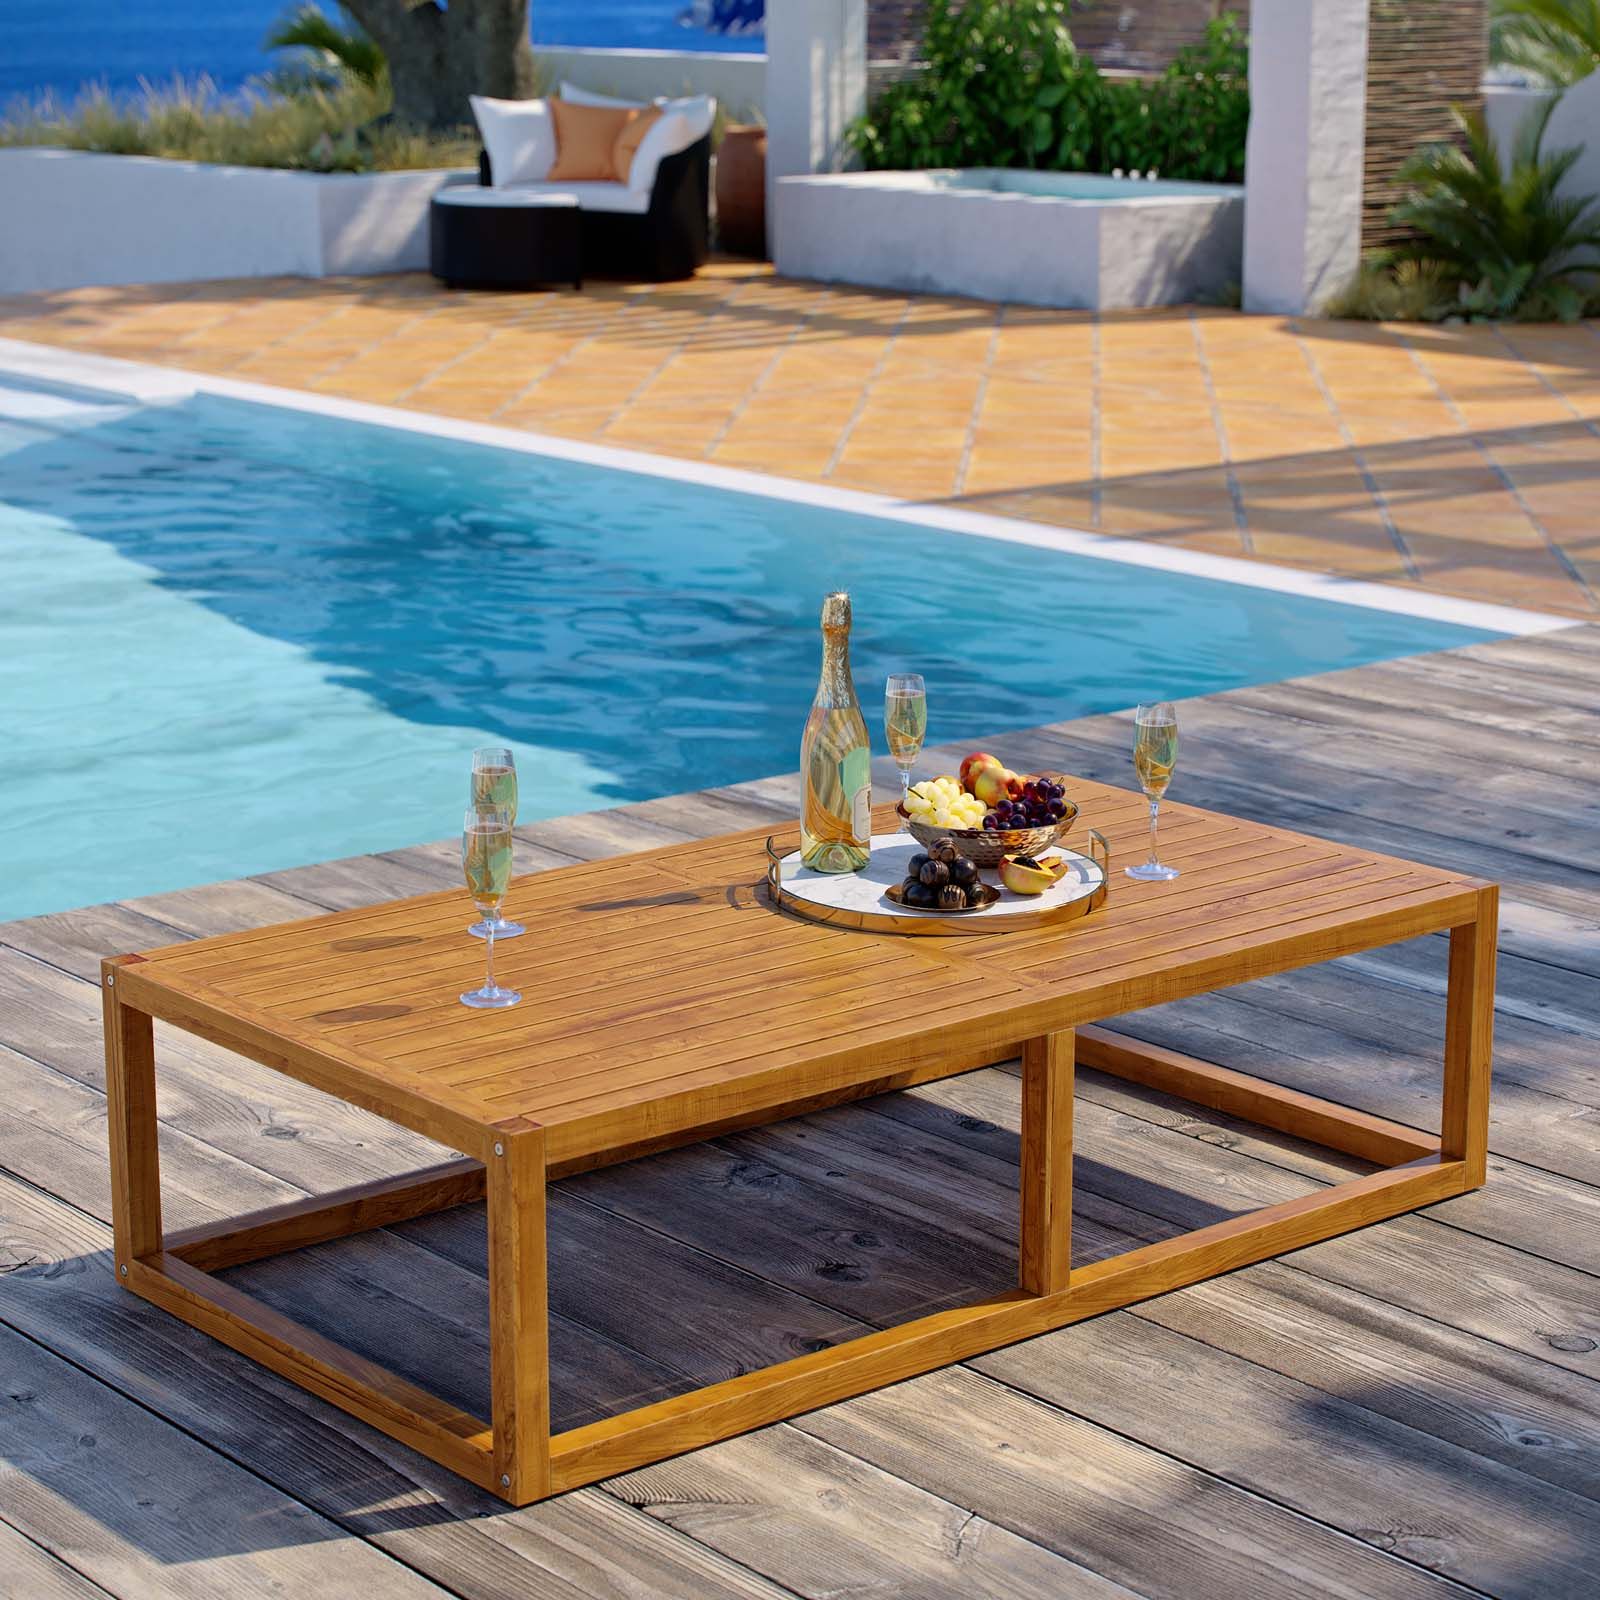 Newbury Outdoor Patio Premium Grade A Teak Wood Coffee Table Natural Pertaining To Modern Outdoor Patio Coffee Tables (View 14 of 20)